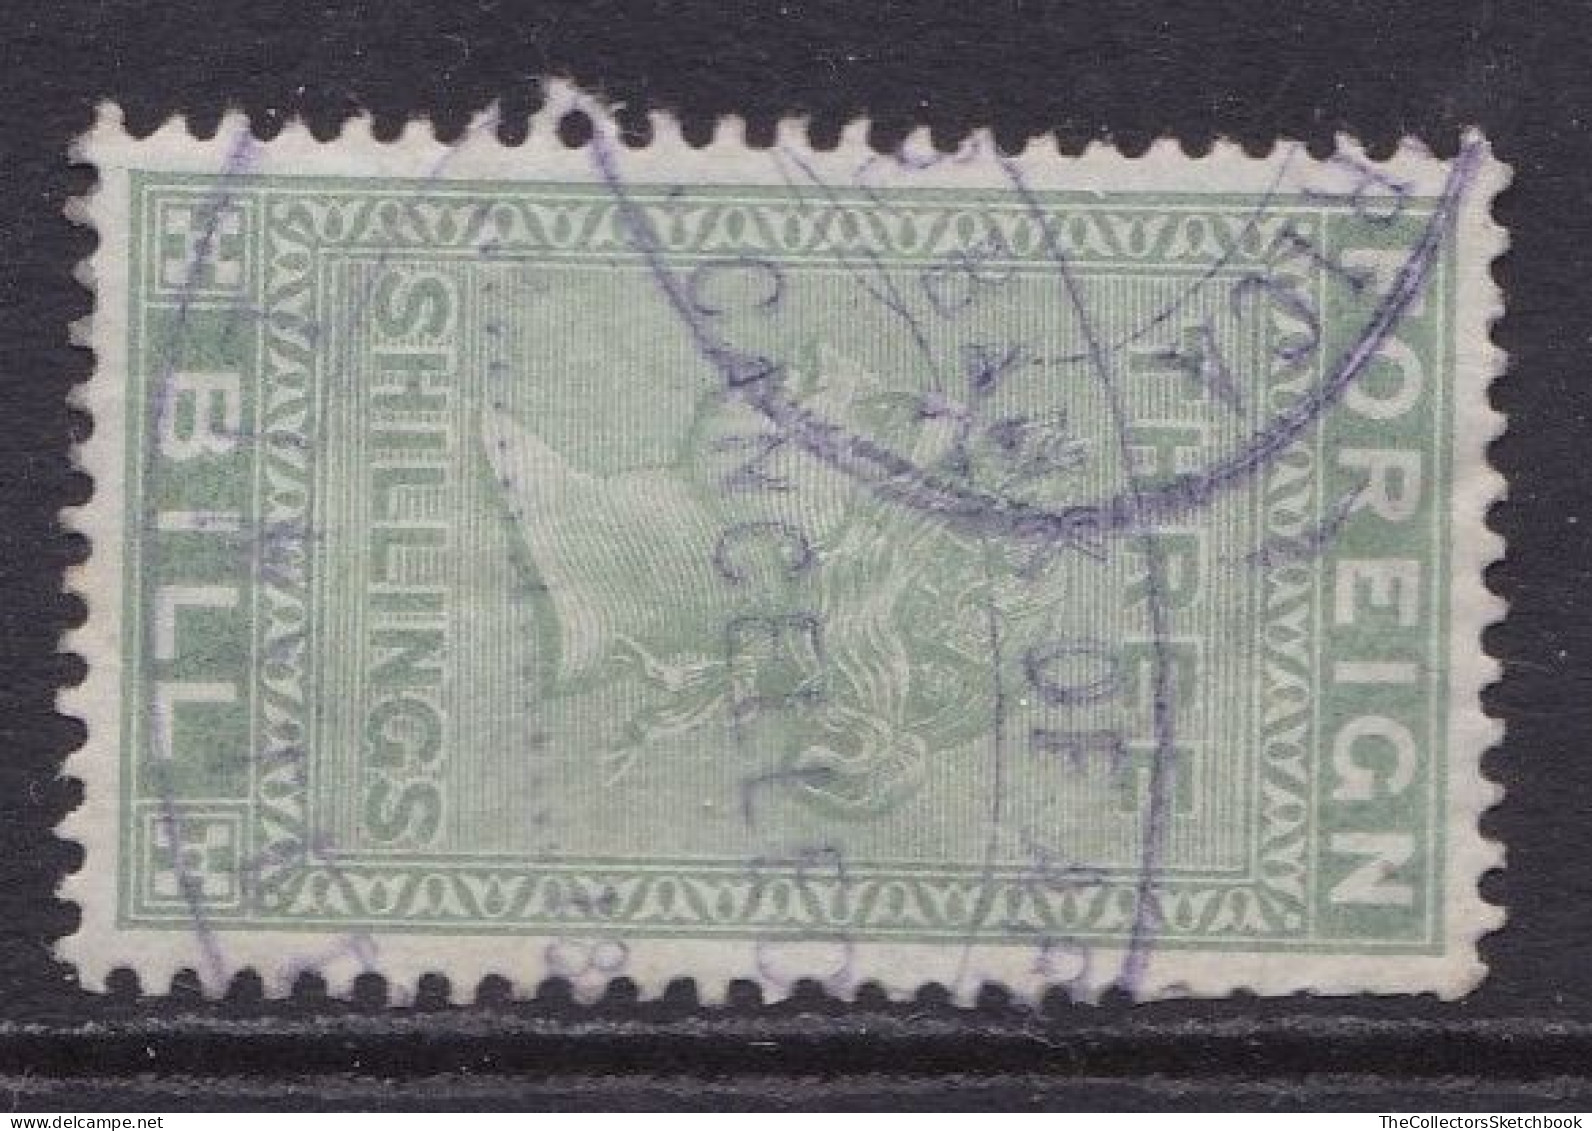 GB Fiscal/ Revenue Stamp. Foreign Bill 3/ - Green  Perf 14 Barefoot 92 - Fiscaux